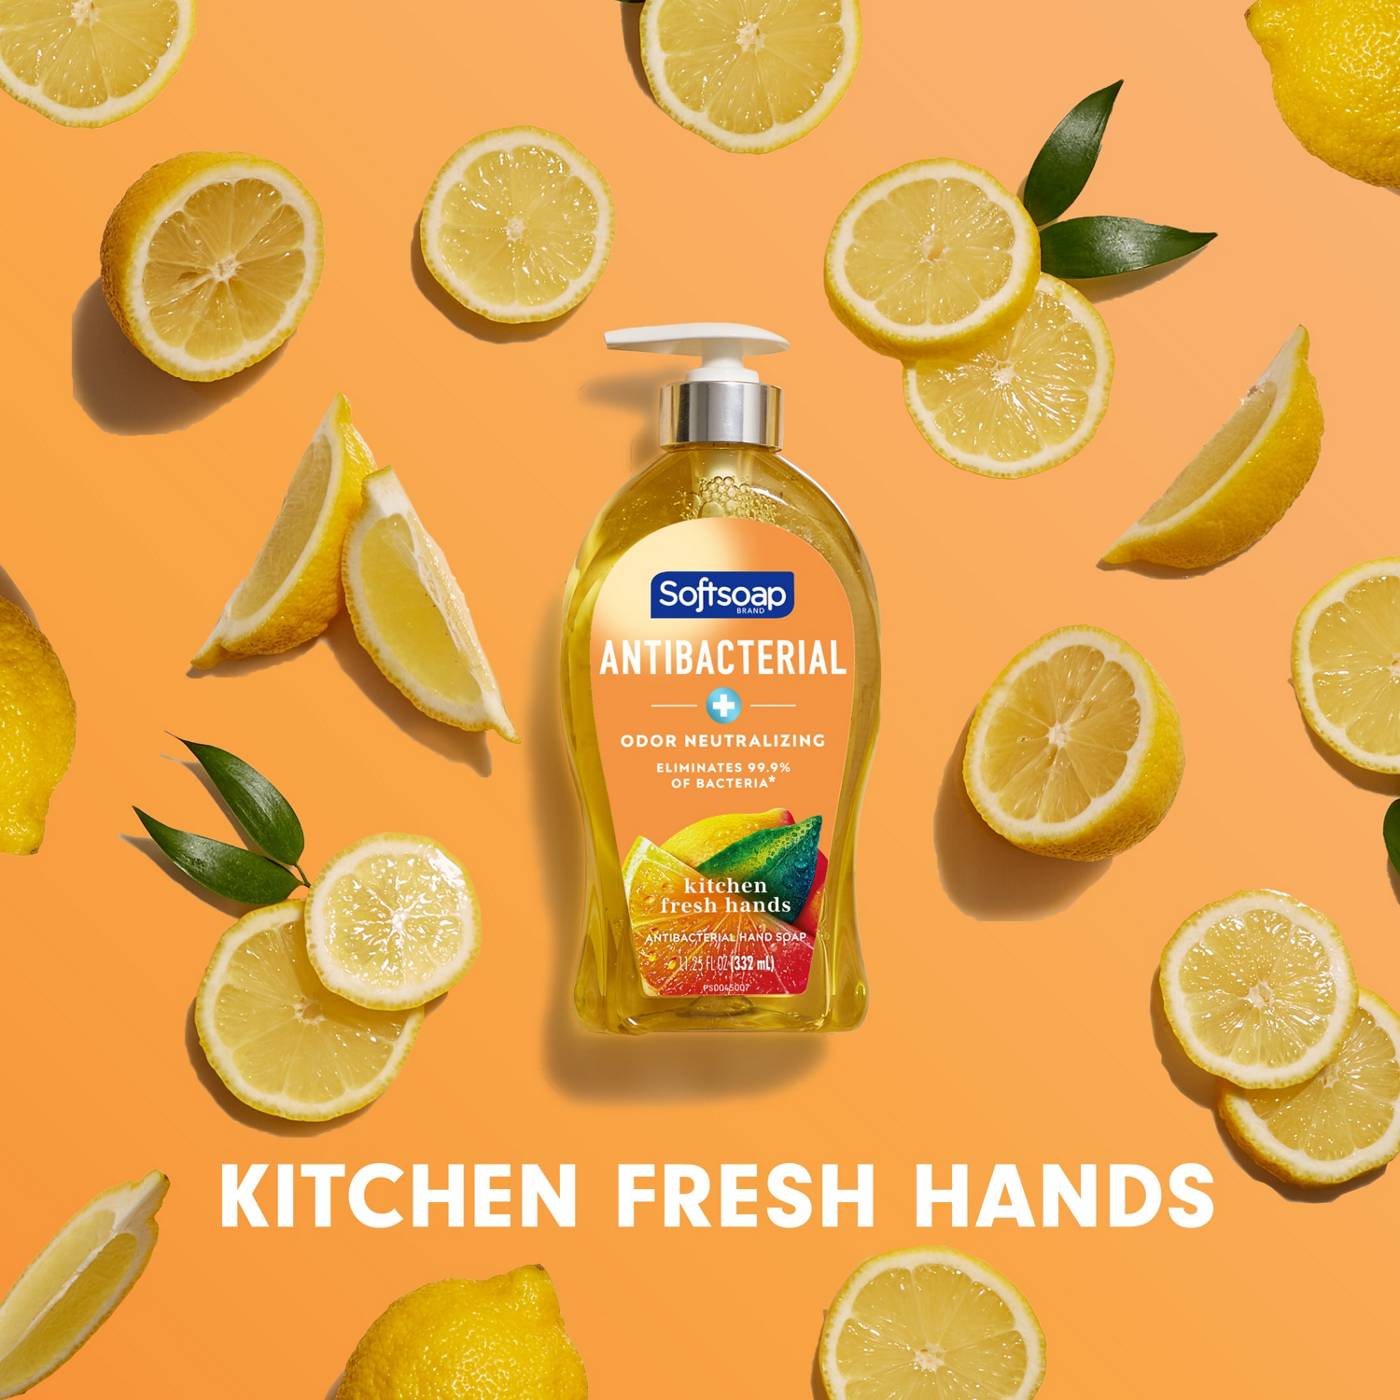 Softsoap Kitchen Fresh Hands Antibacterial Citrus Hand Soap; image 7 of 9